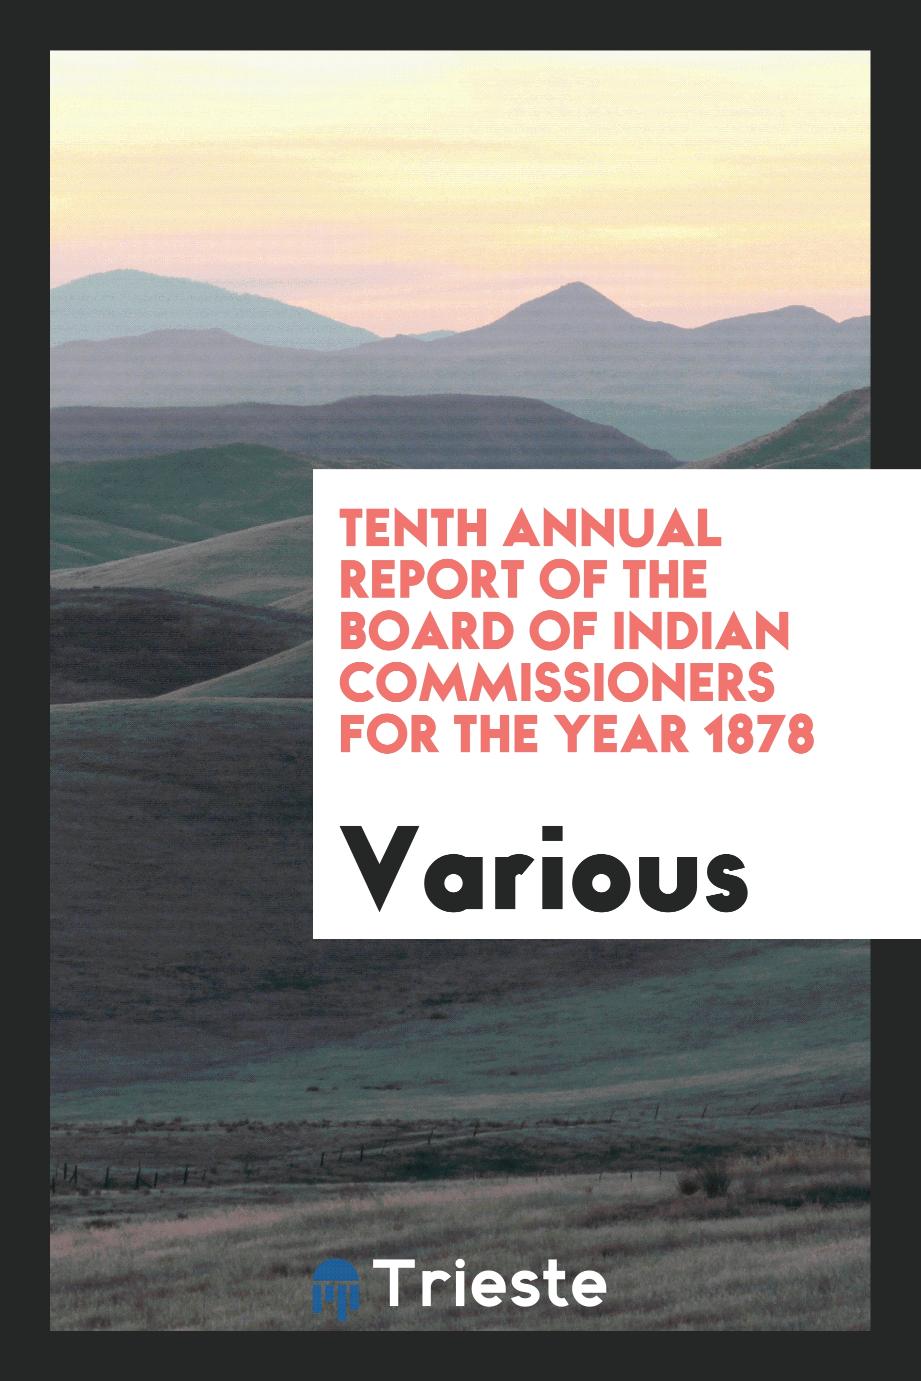 Tenth Annual Report of the Board of Indian Commissioners for the Year 1878